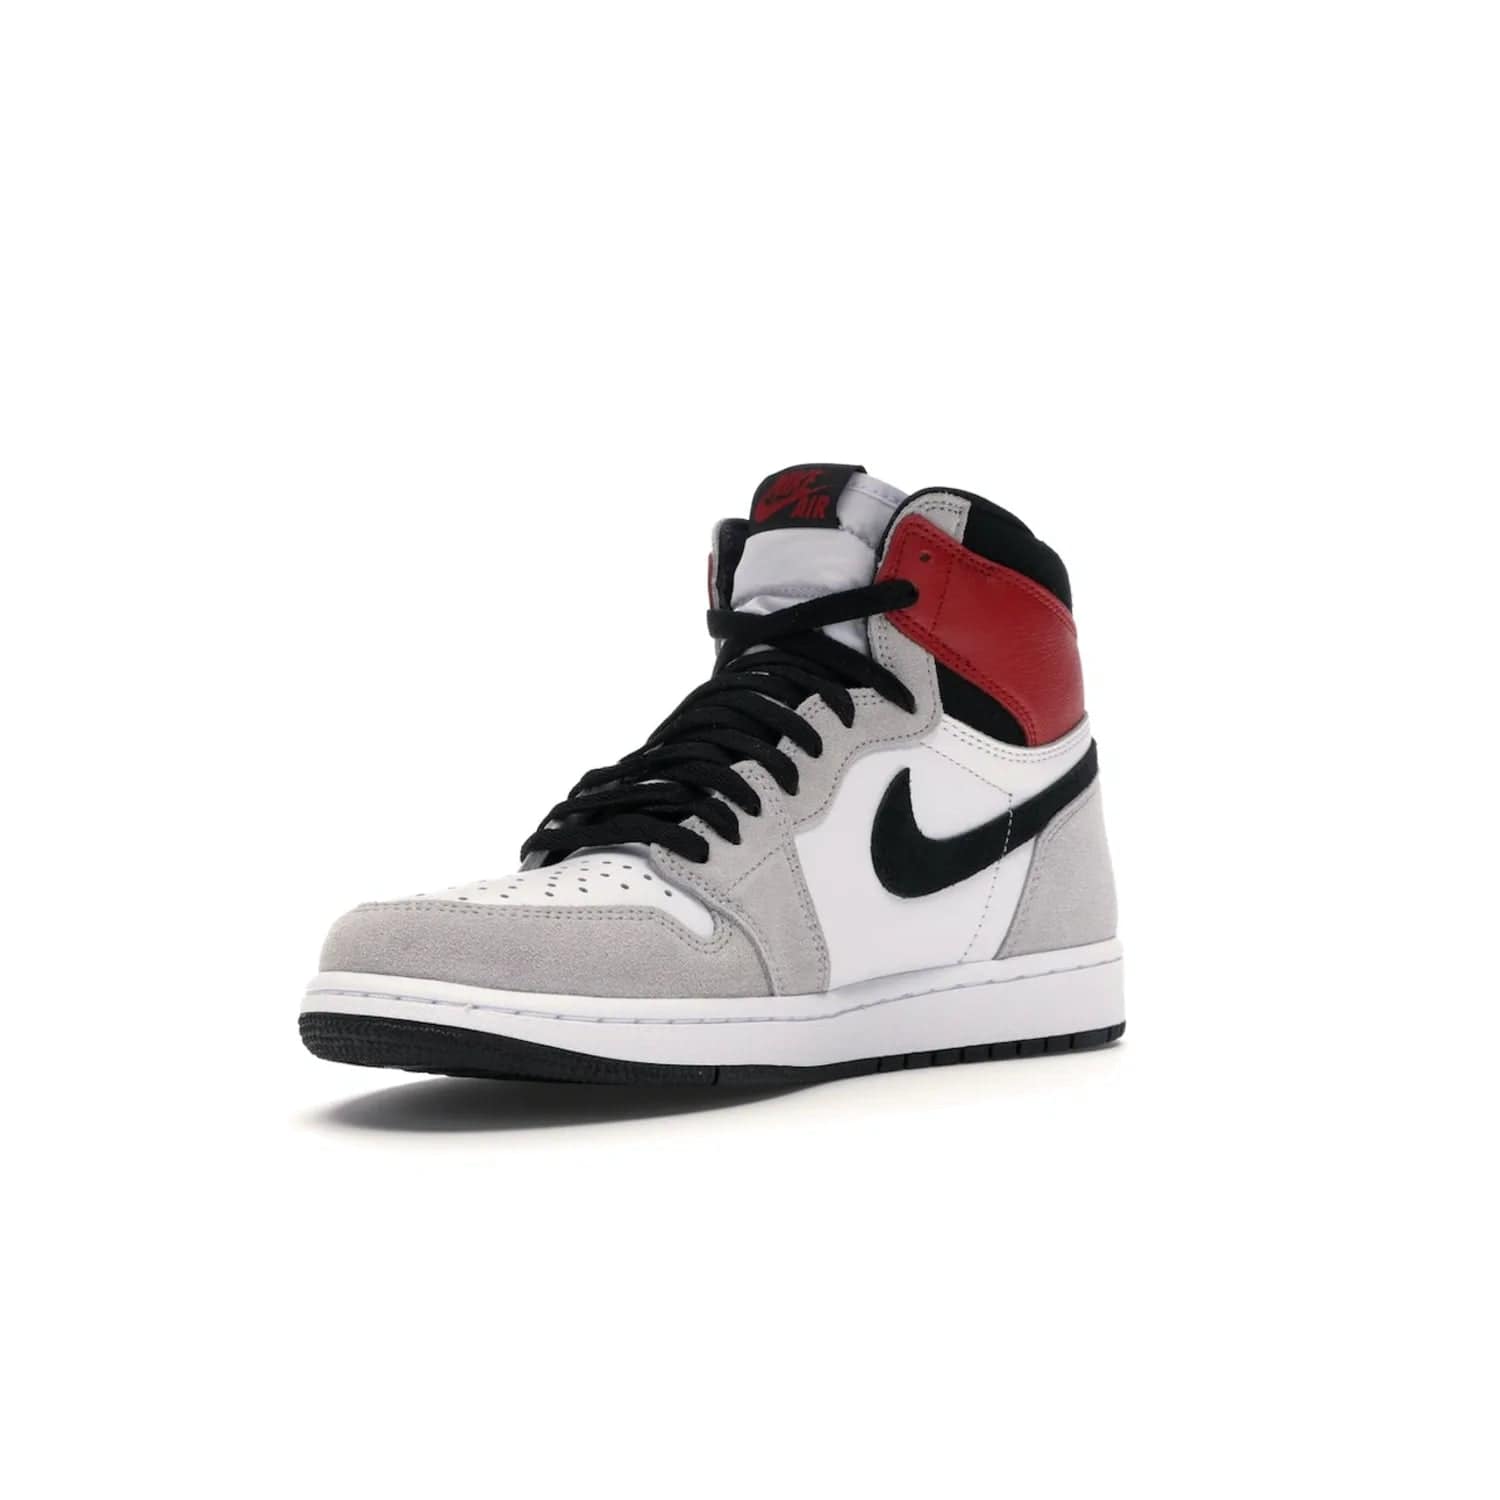 Jordan 1 Retro High Light Smoke Grey - Image 14 - Only at www.BallersClubKickz.com - Comfortable and stylish, Jordan 1 Retro High Light Smoke Grey offers a unique spin on a classic design. White leather, grey suede, red leather and black details are set on a white midsole and black outsole. Get the sneaker released in July 2020 and add a twist to your wardrobe.